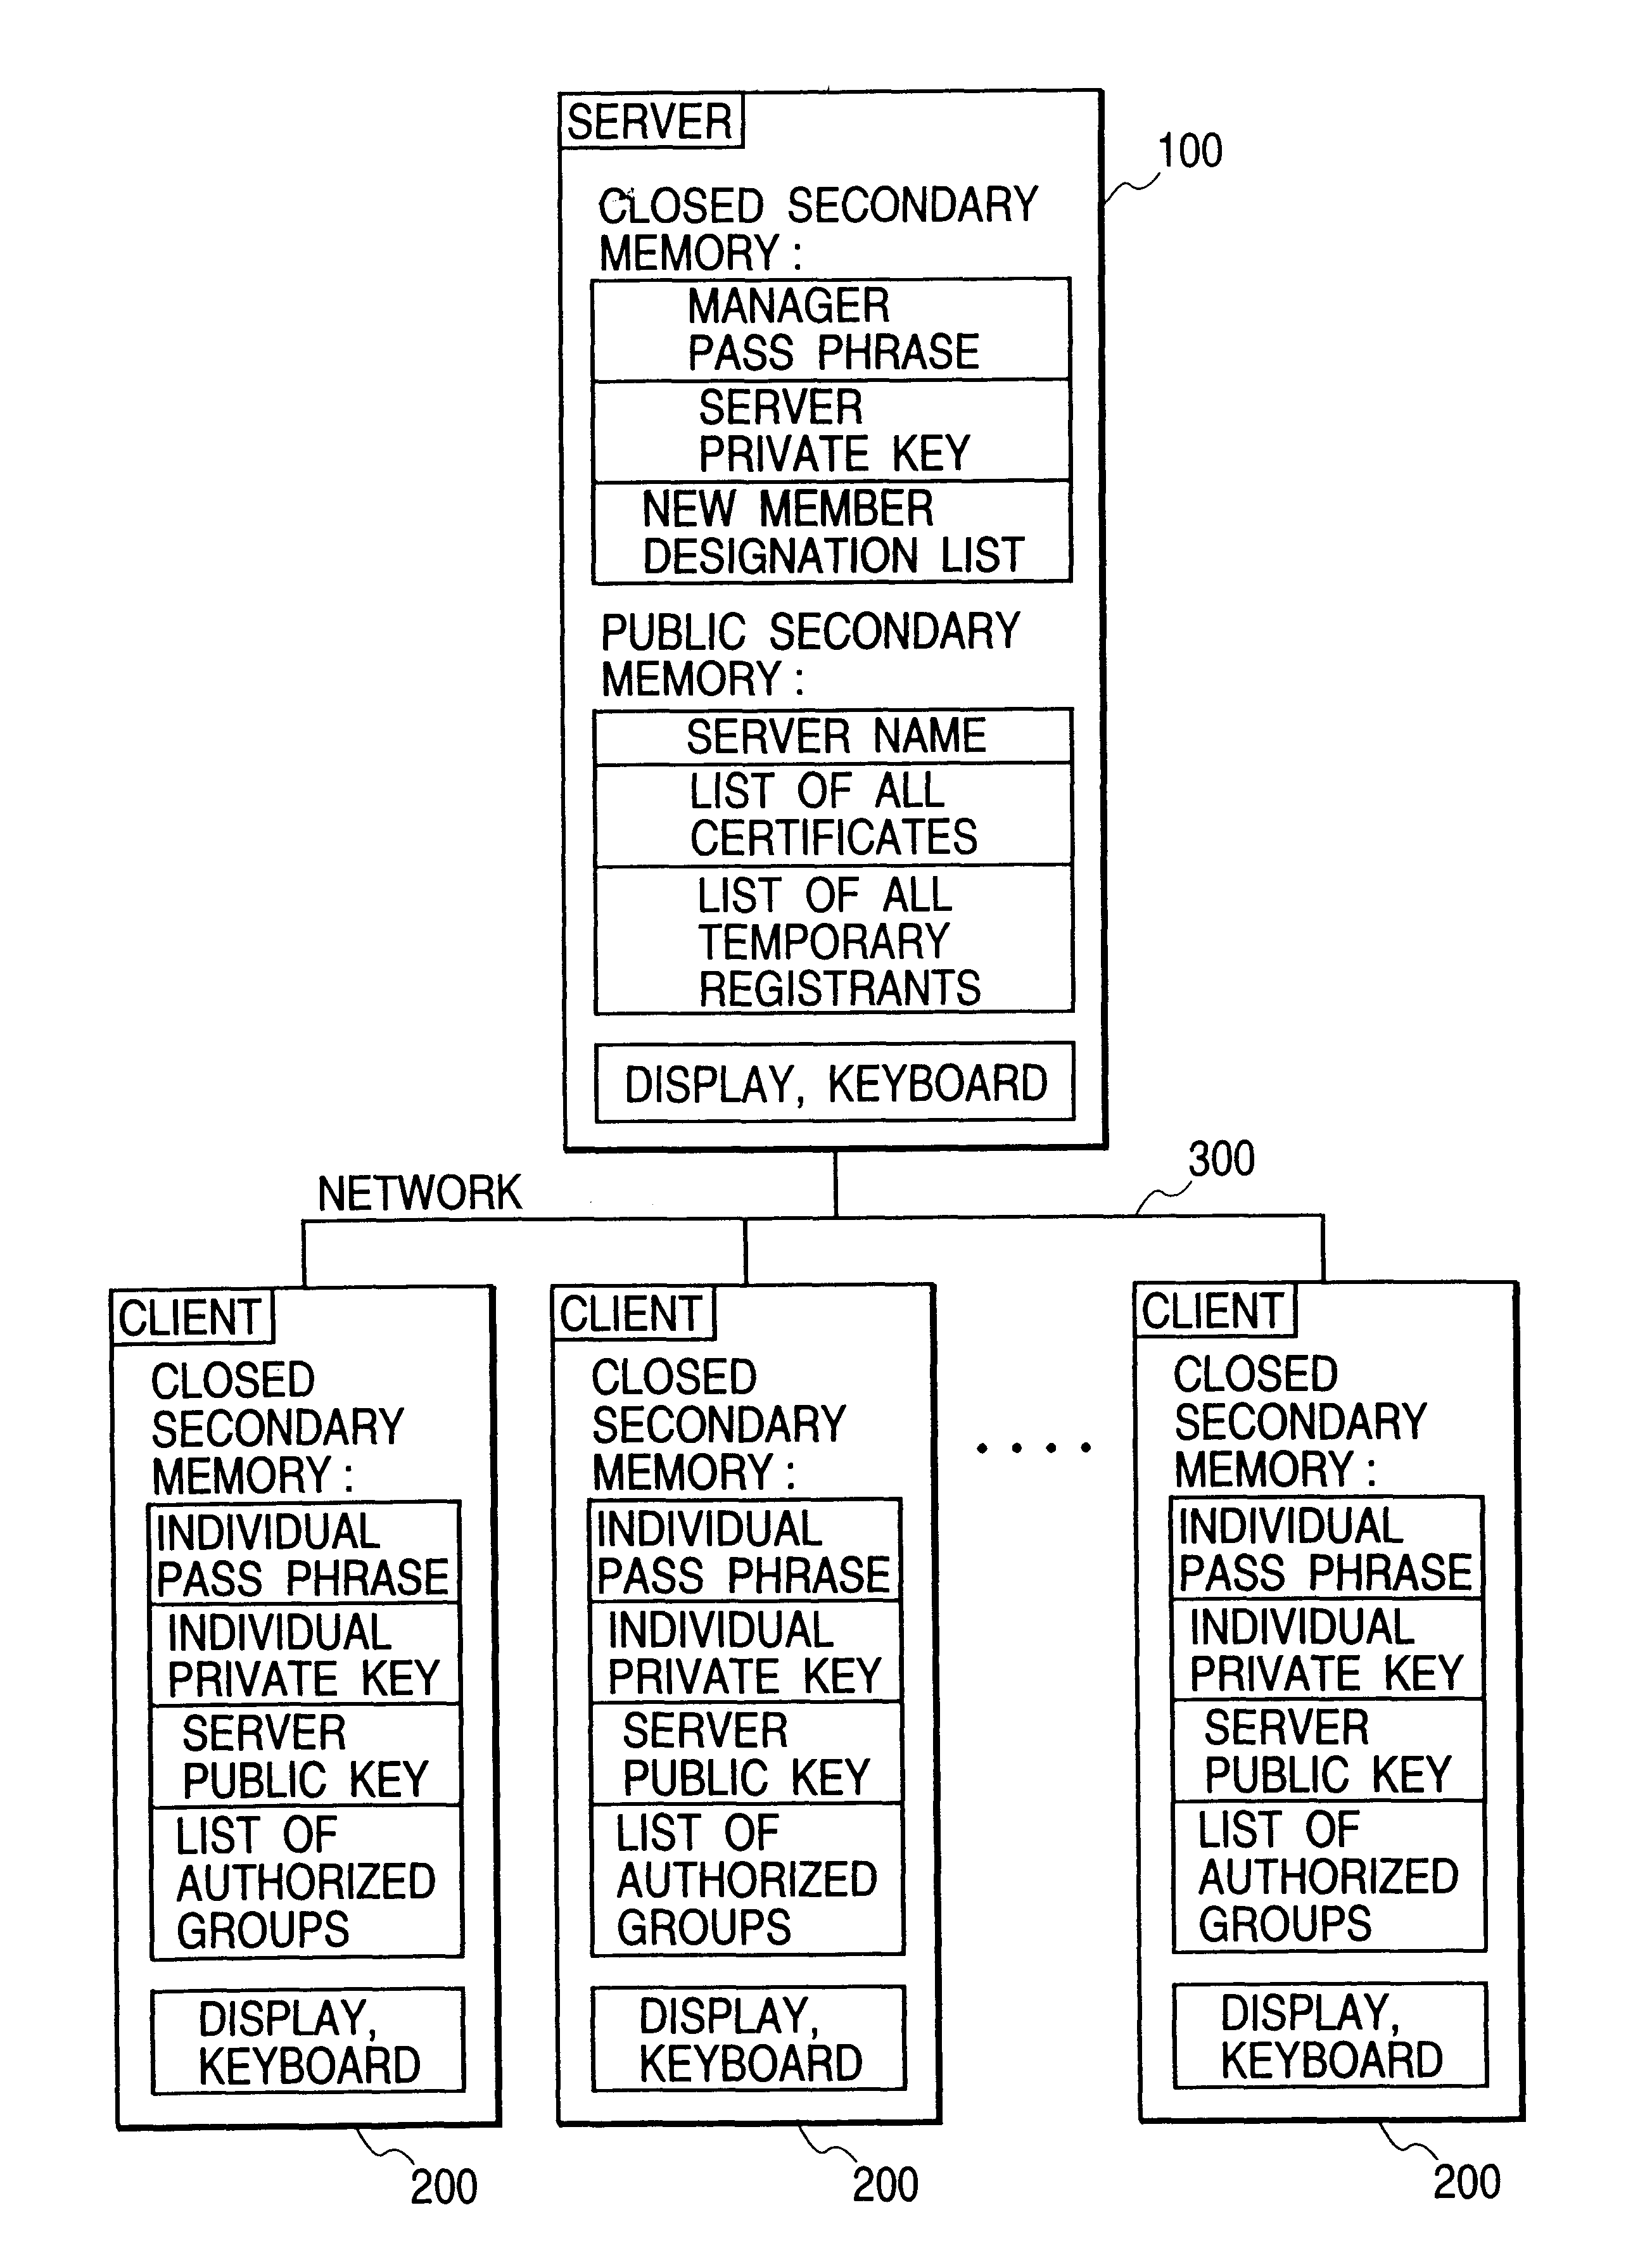 Certification apparatus and method